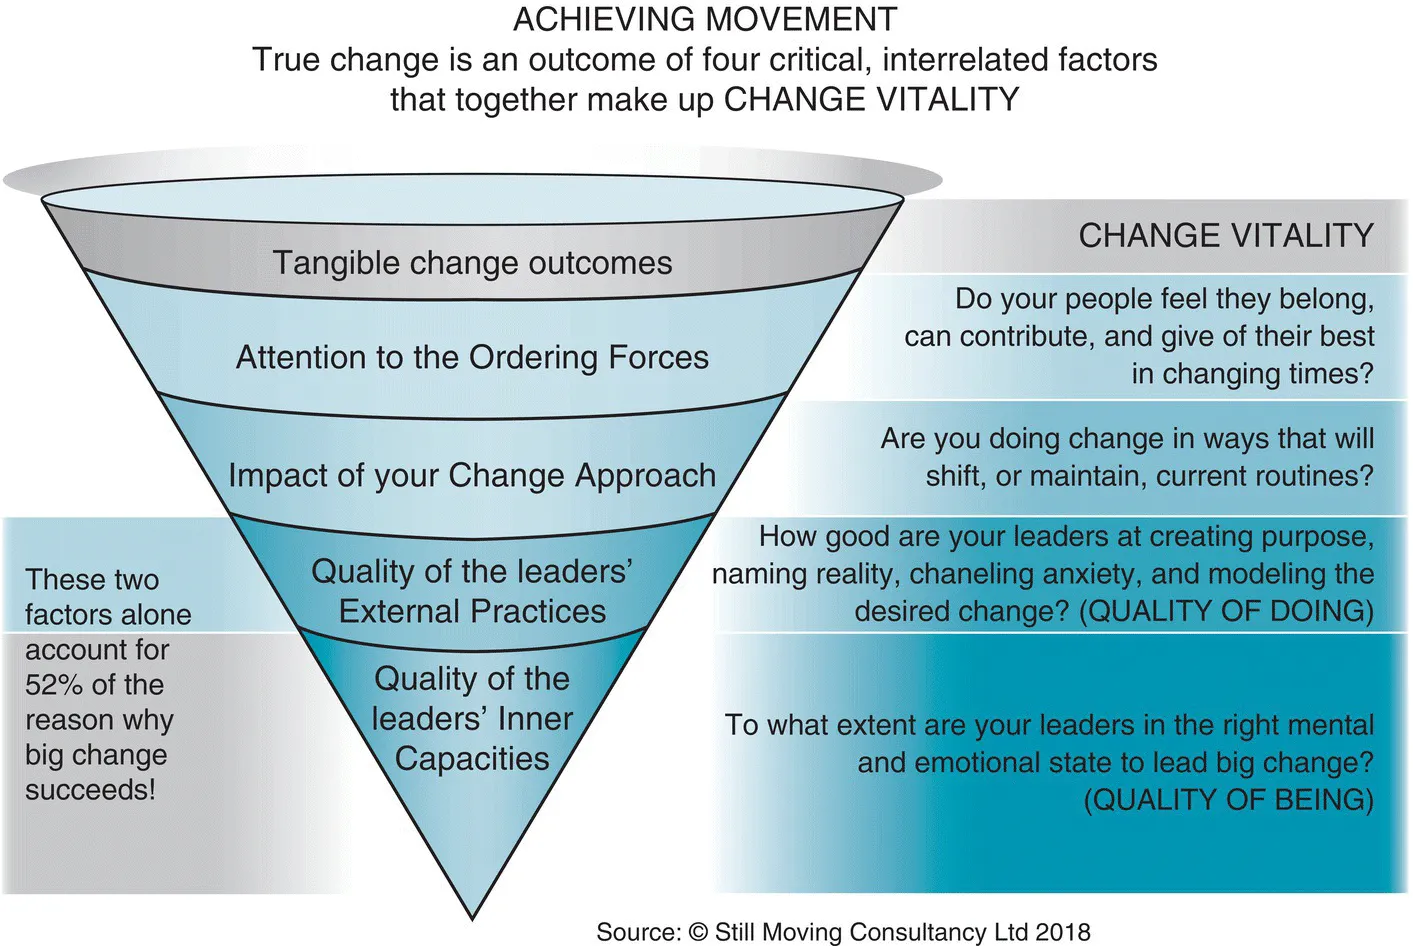 Diagram displaying an inverted pyramid with segments for “Tangible change outcomes,” “Attention to the ordering forces,” “Impact of your change approach,” and so on (top–bottom).